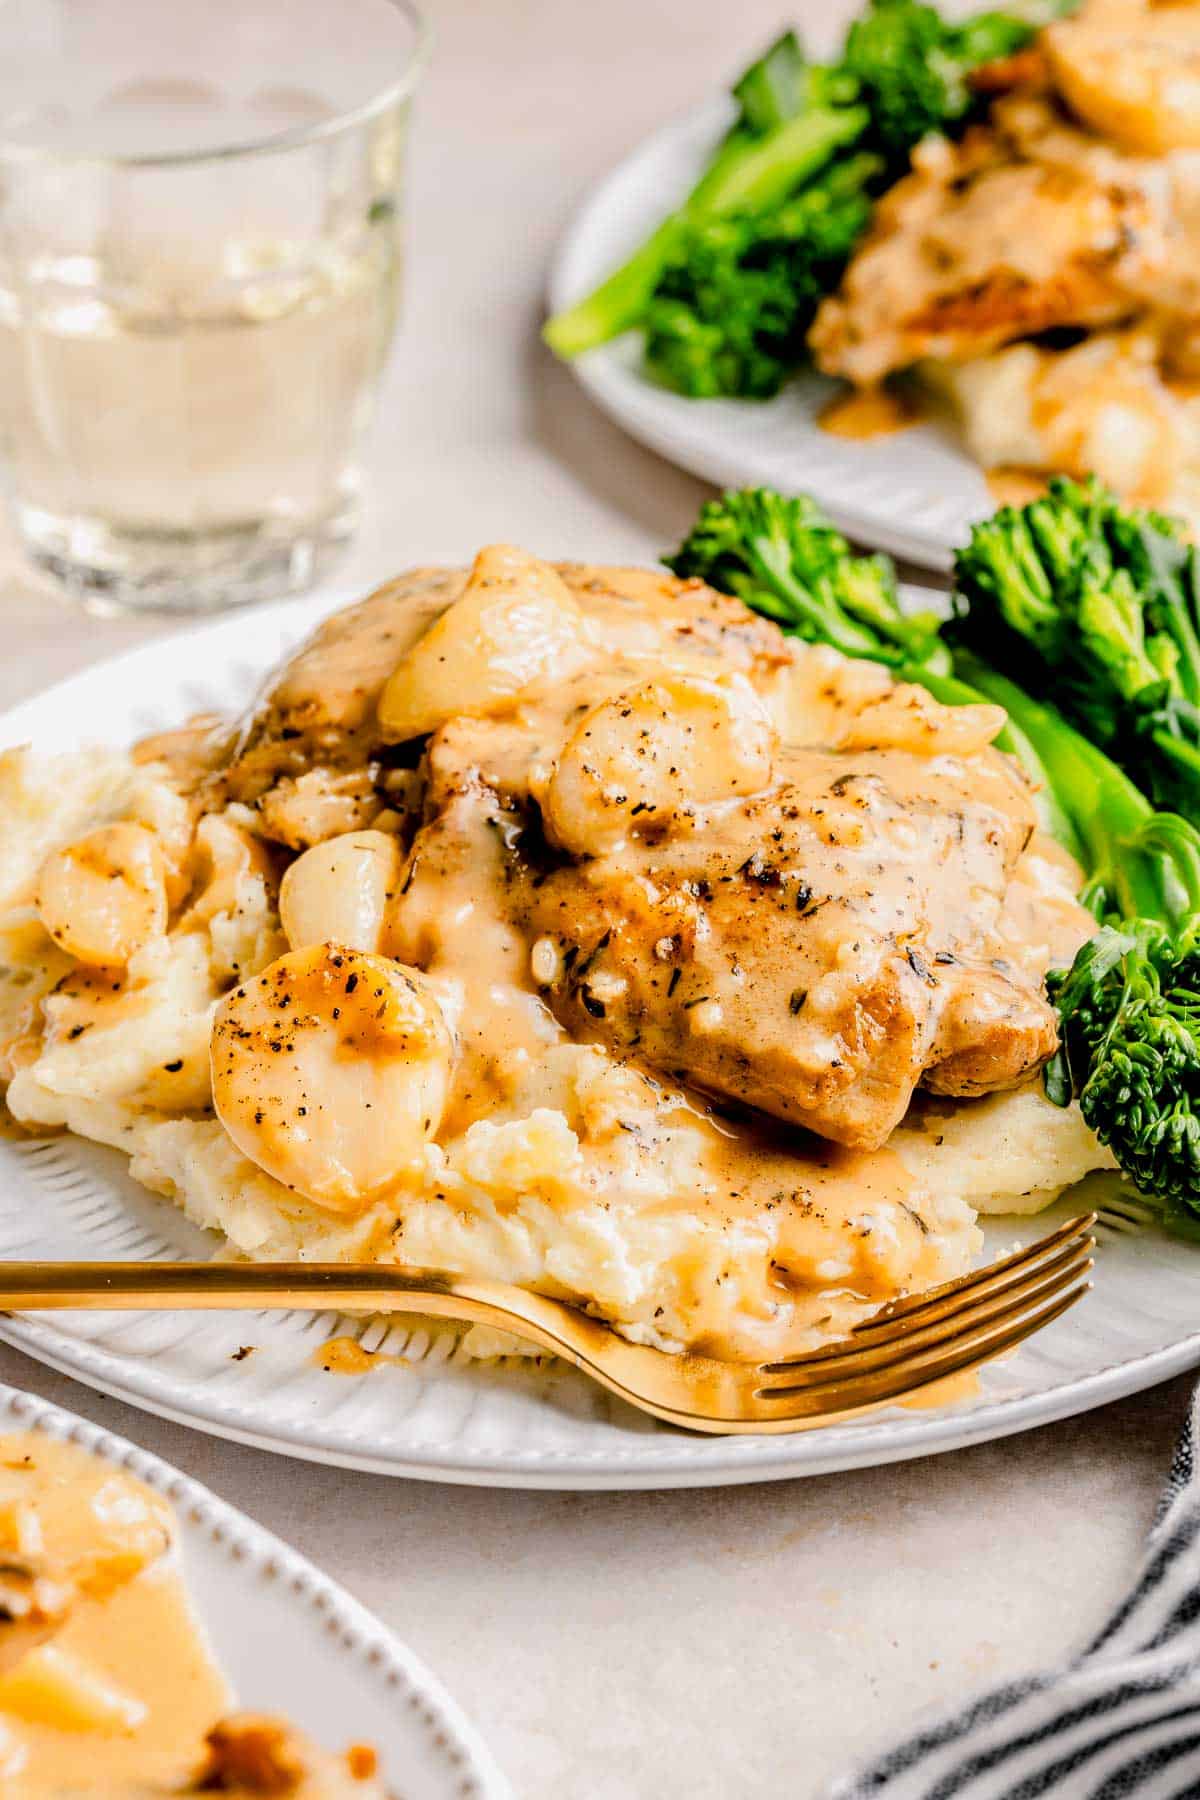 40 clove garlic chicken on a plate with broccolini.